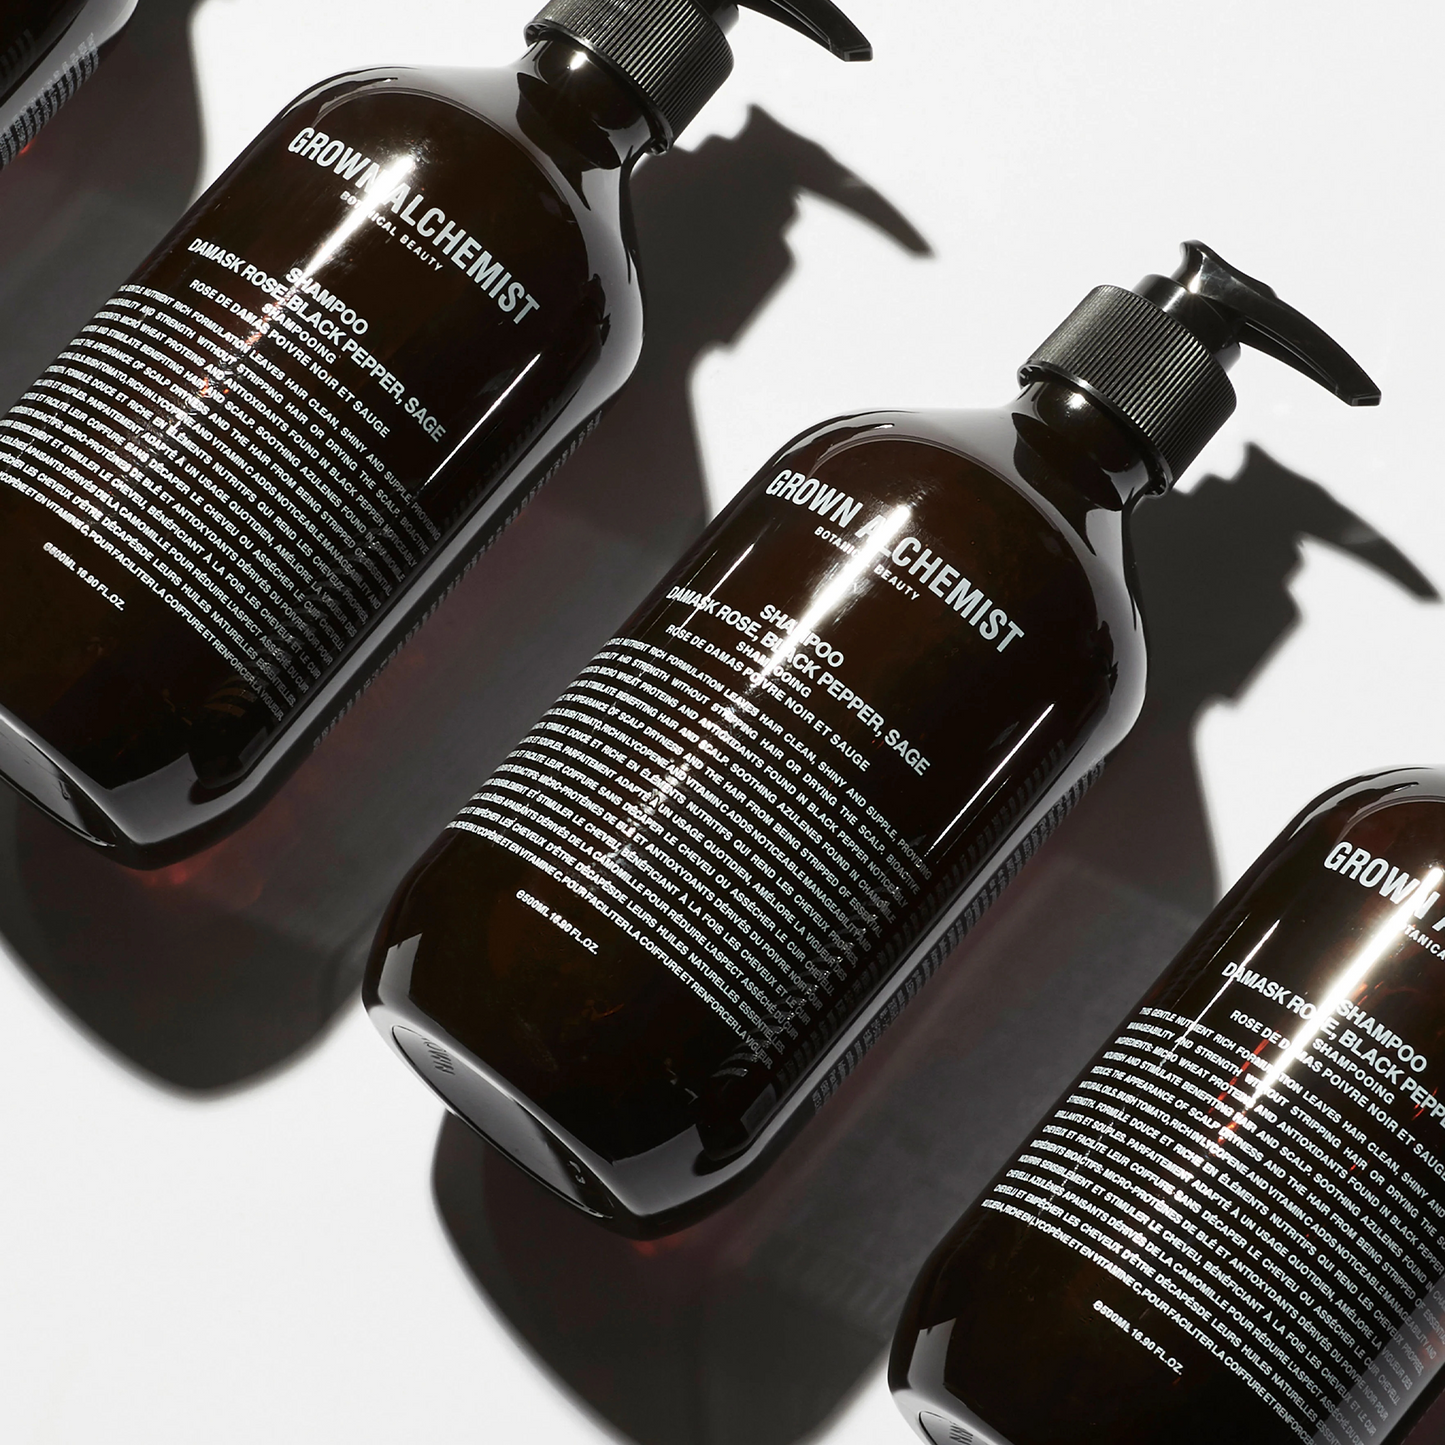 Grown Alchemist Shampoo: This gentle nutrient rich formulation leaves hair clean, shiny and supple. Perfect for daily use, it provides manageability and strength without stripping hair or drying the scalp.